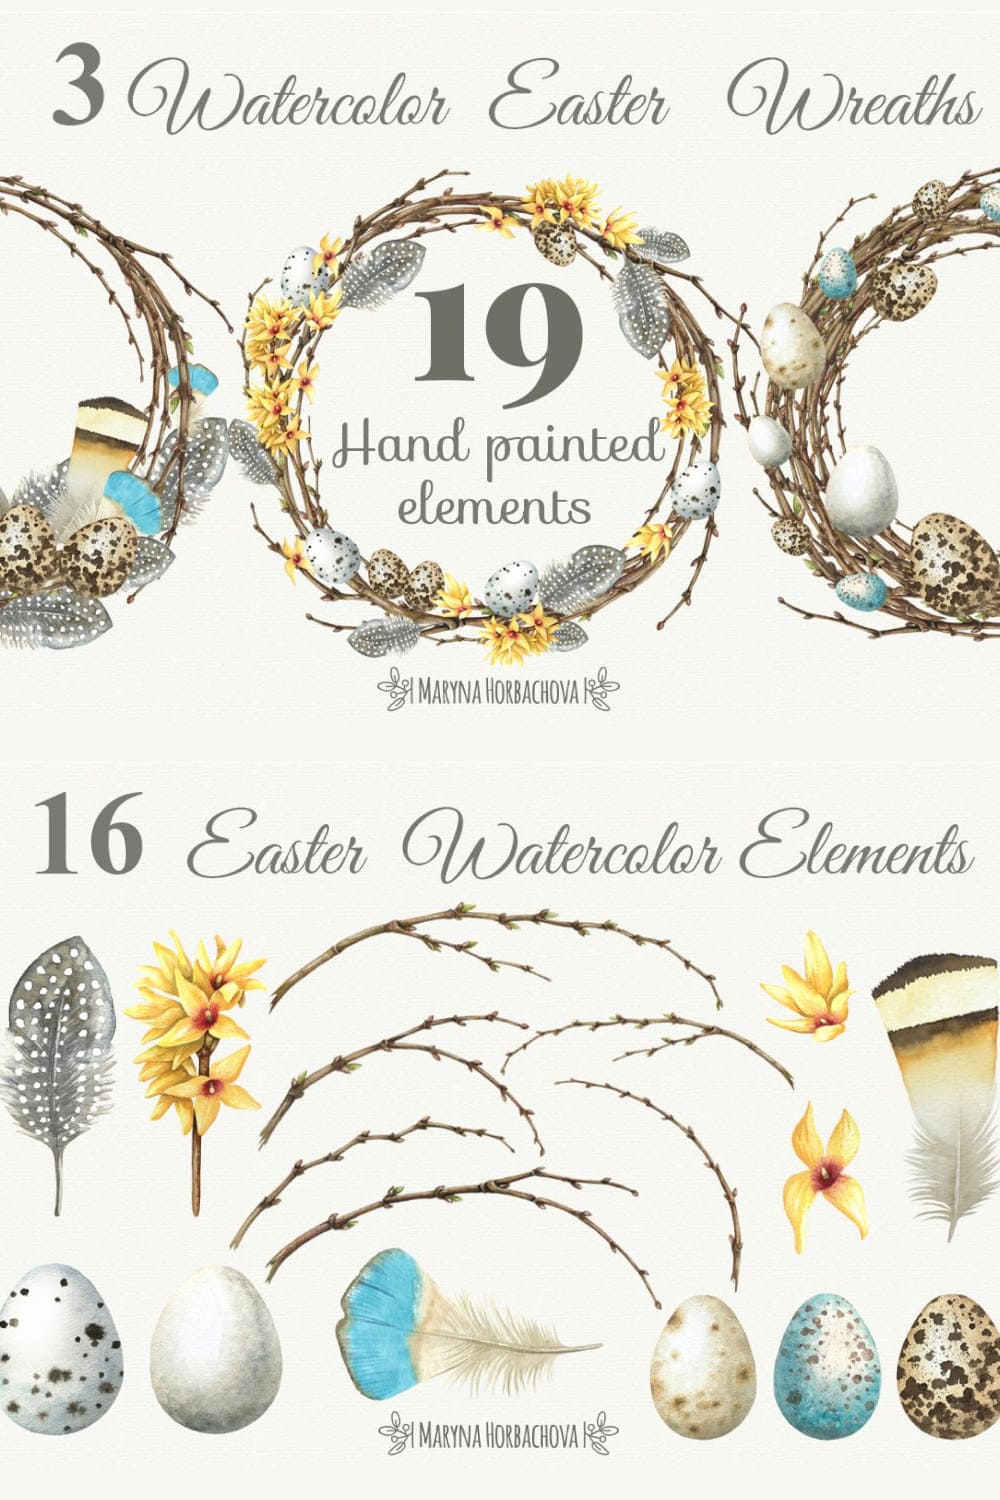 Watercolor Easter Wreaths - pinterest image preview.